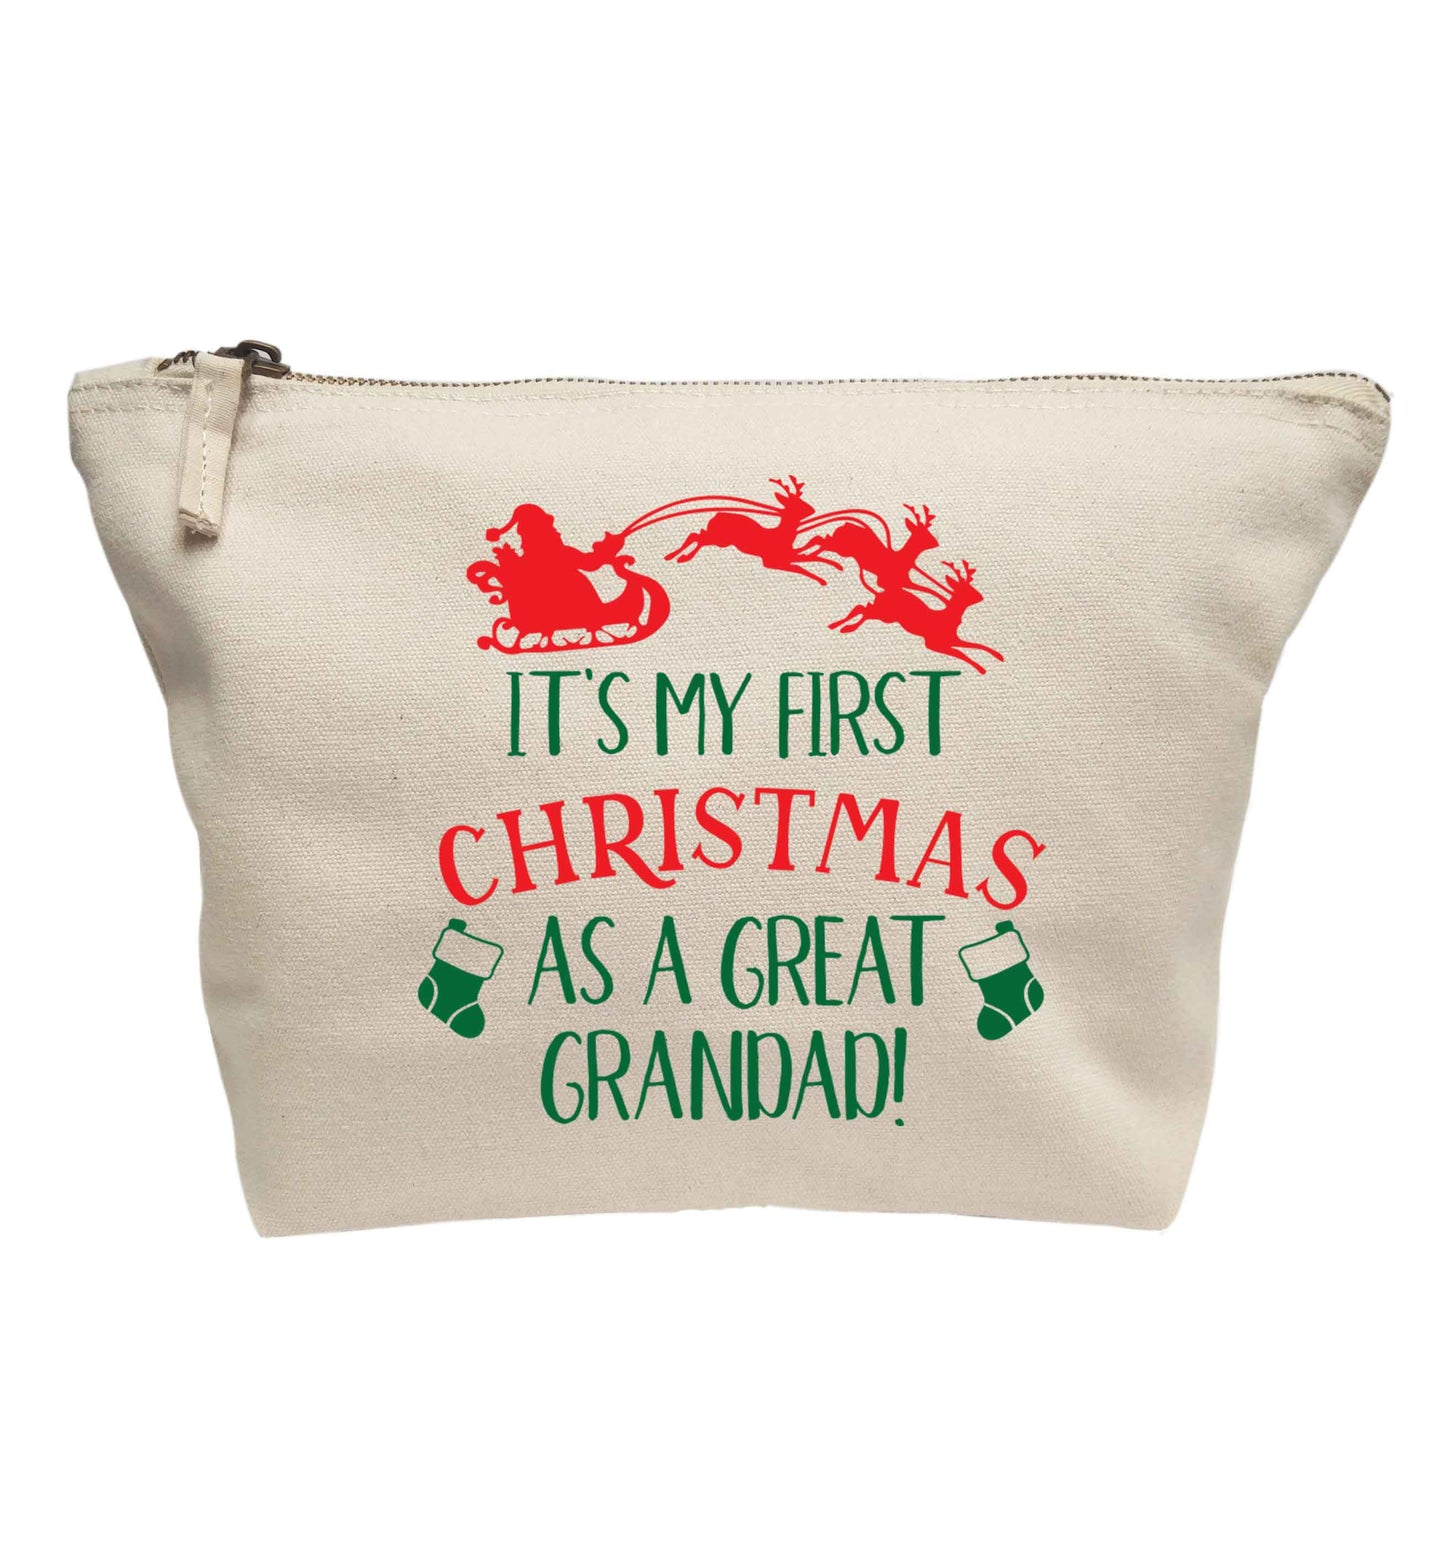 It's my first Christmas as a great grandad! | makeup / wash bag